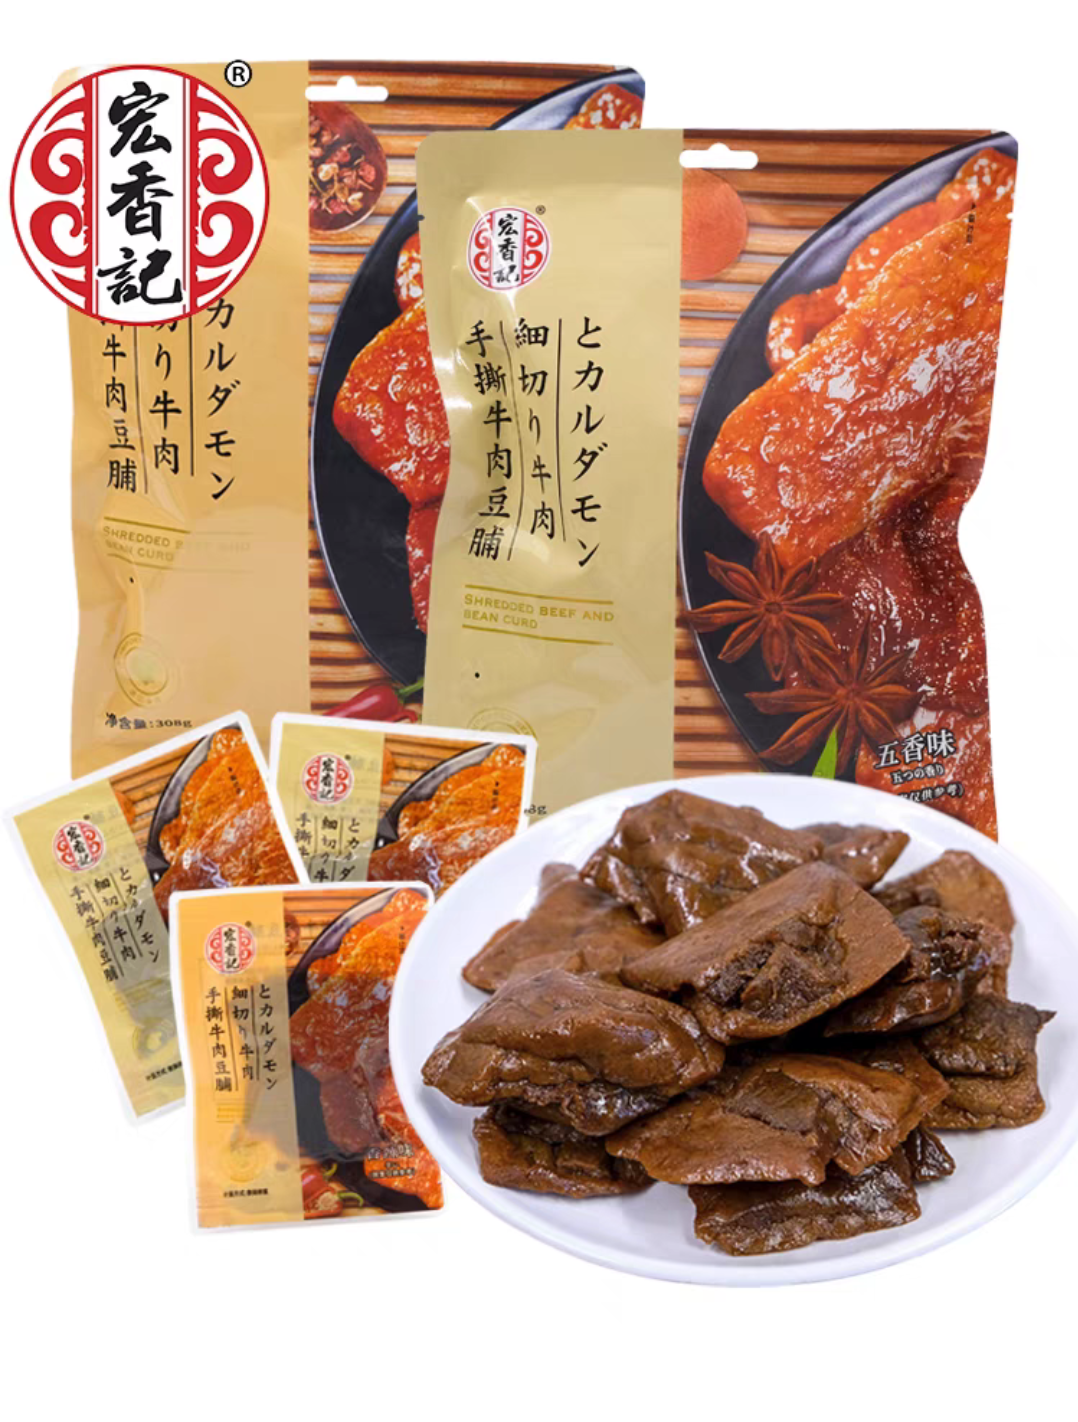 Hand shredded beef and bean jerky (five flavors) 308g